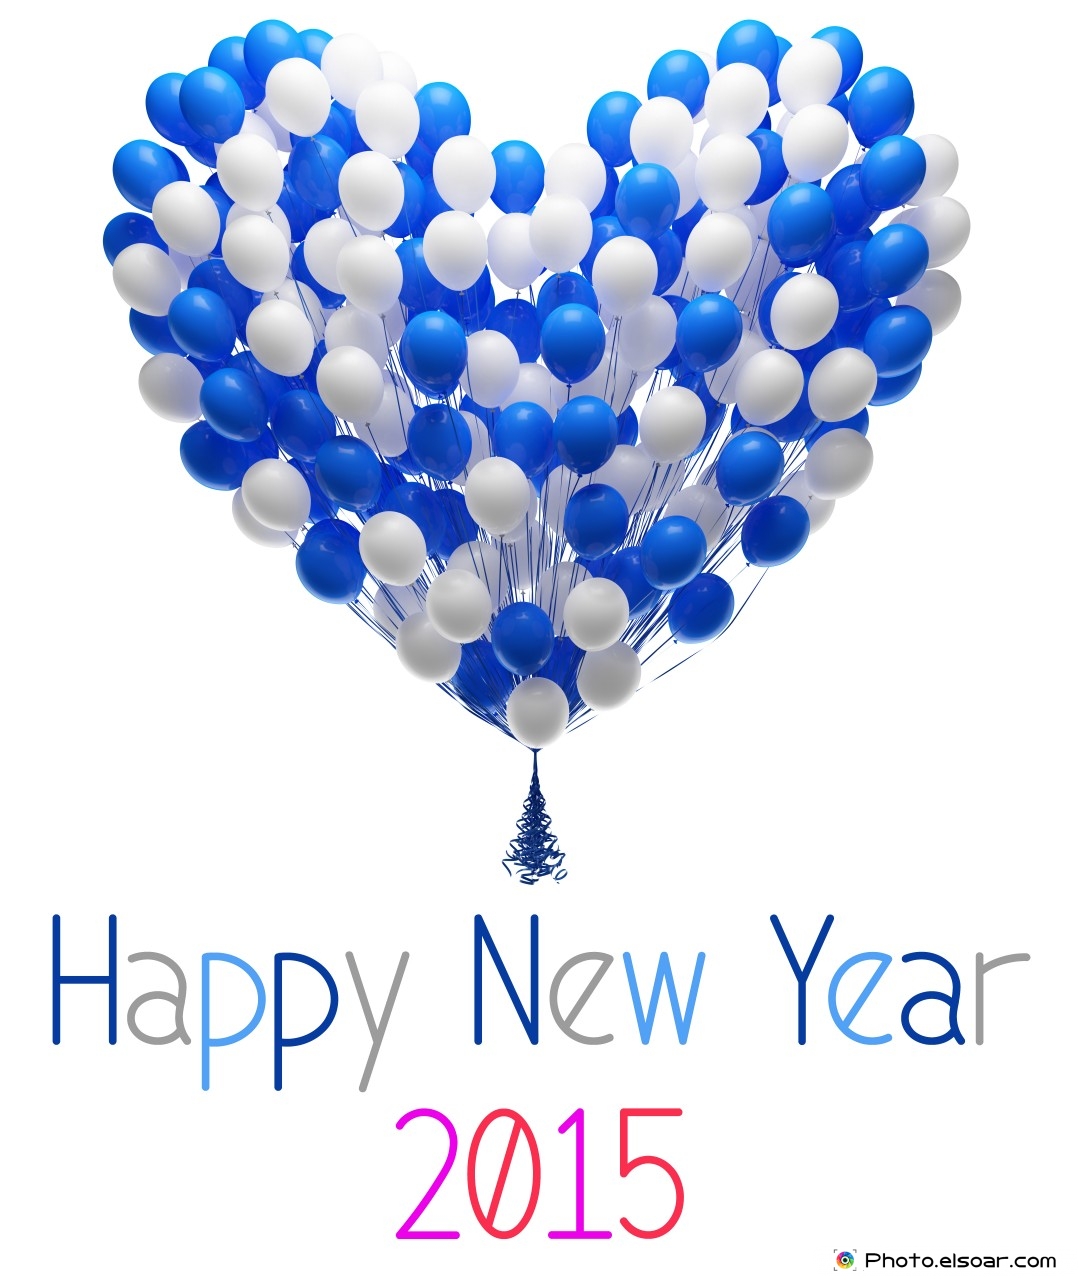 Top Wallpaper For Happy New Year With Colorful Balloons